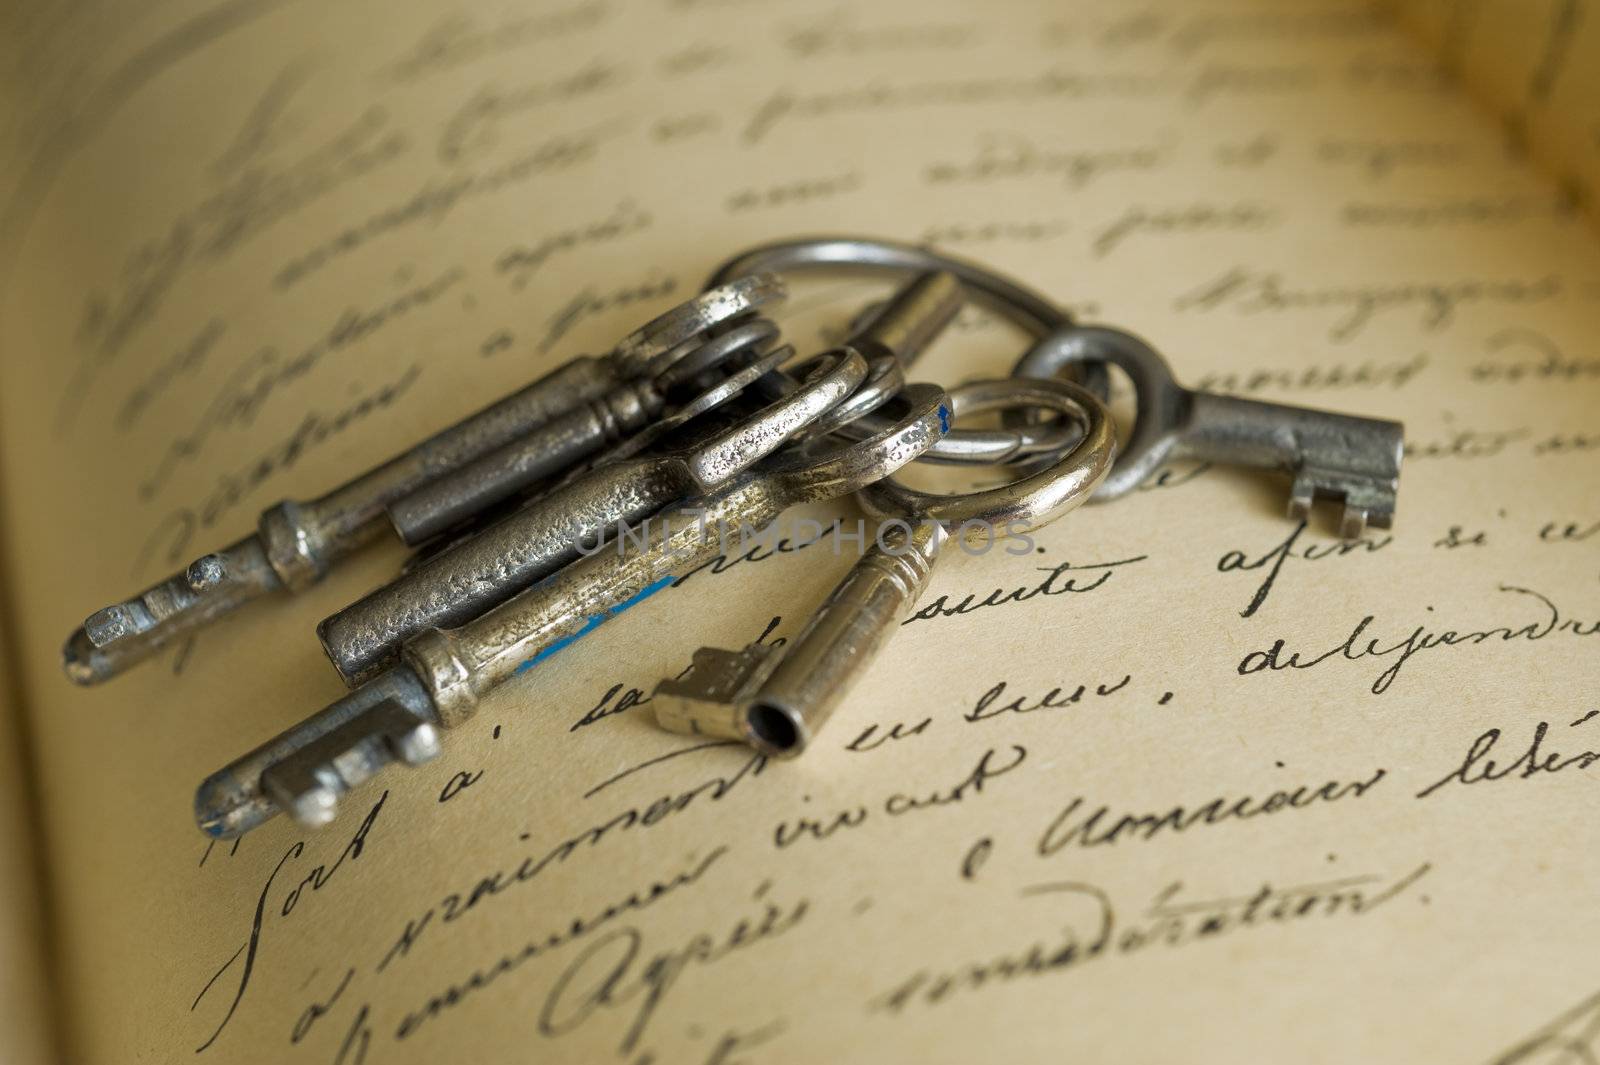 Keys and manusckript, taken on June 2009 in Moscow Russia